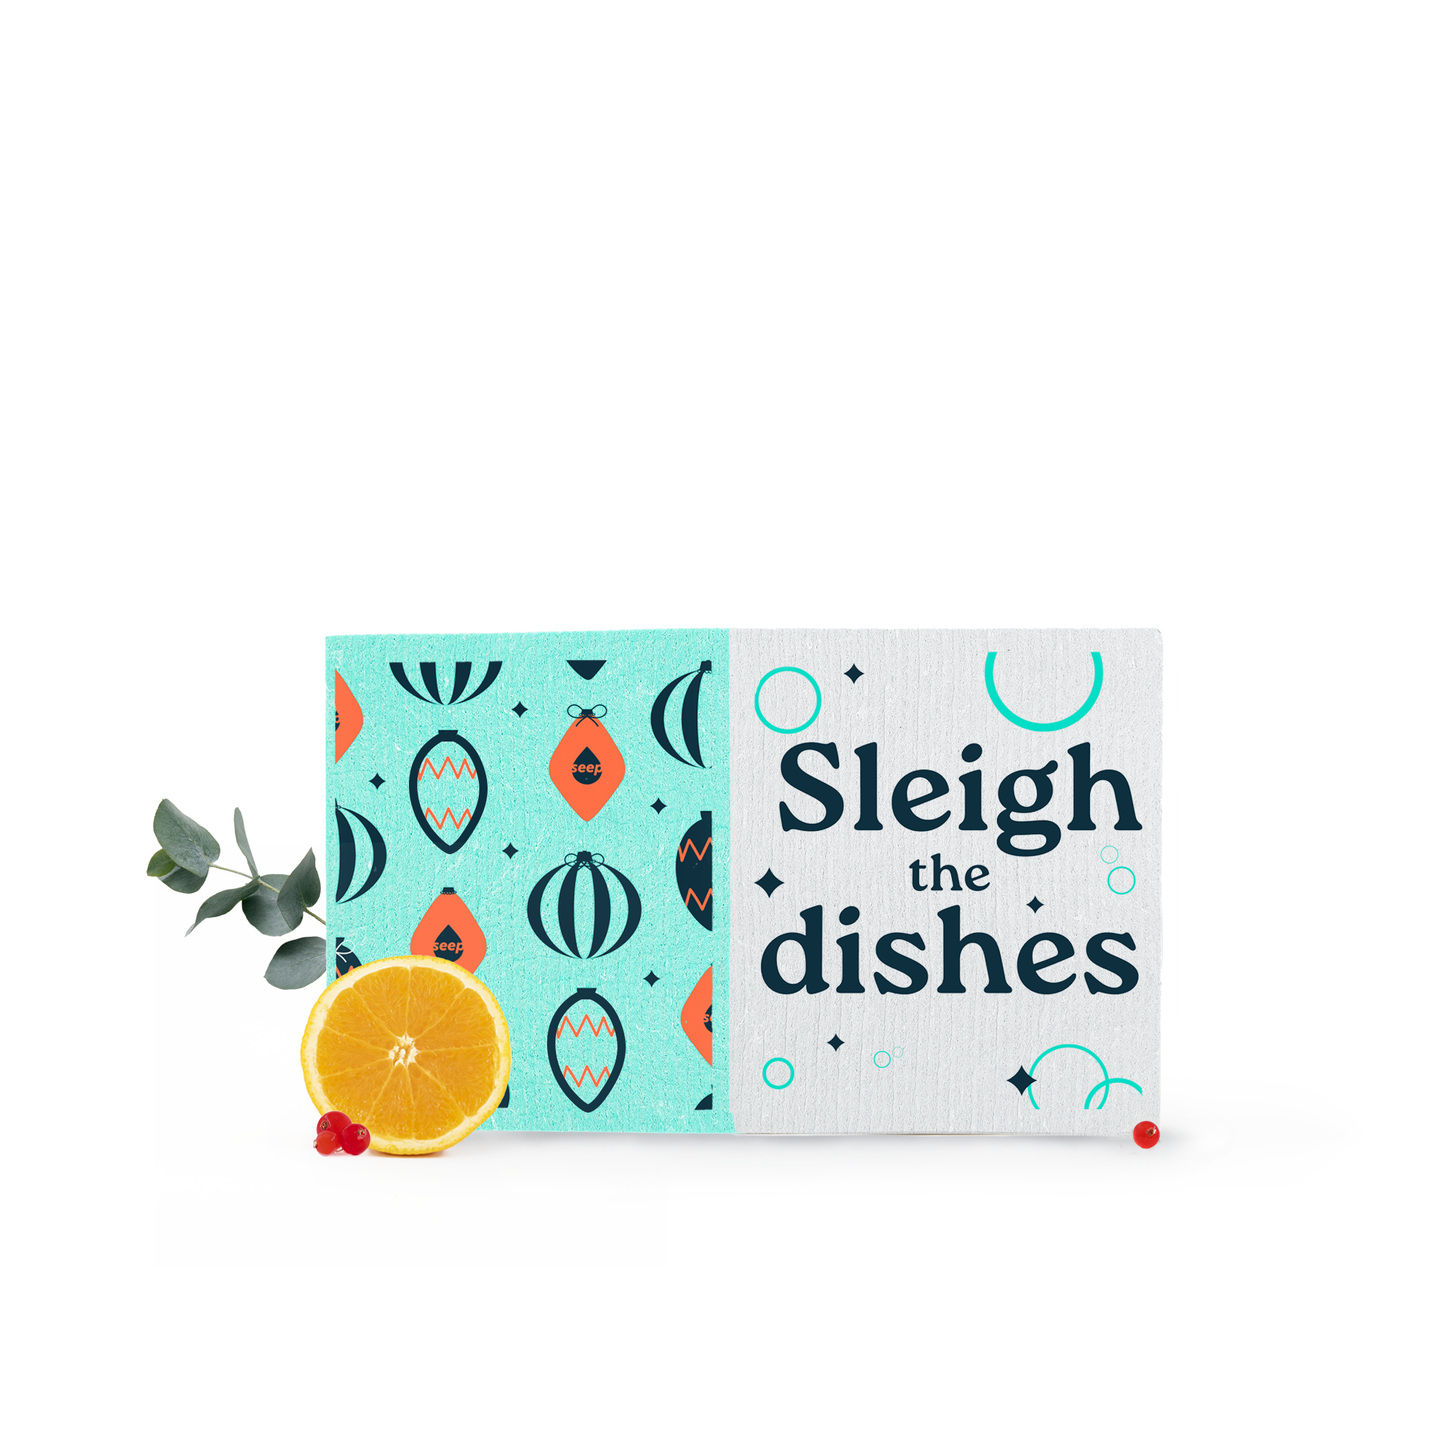 Sleigh The Dishes printed sponge cloth design